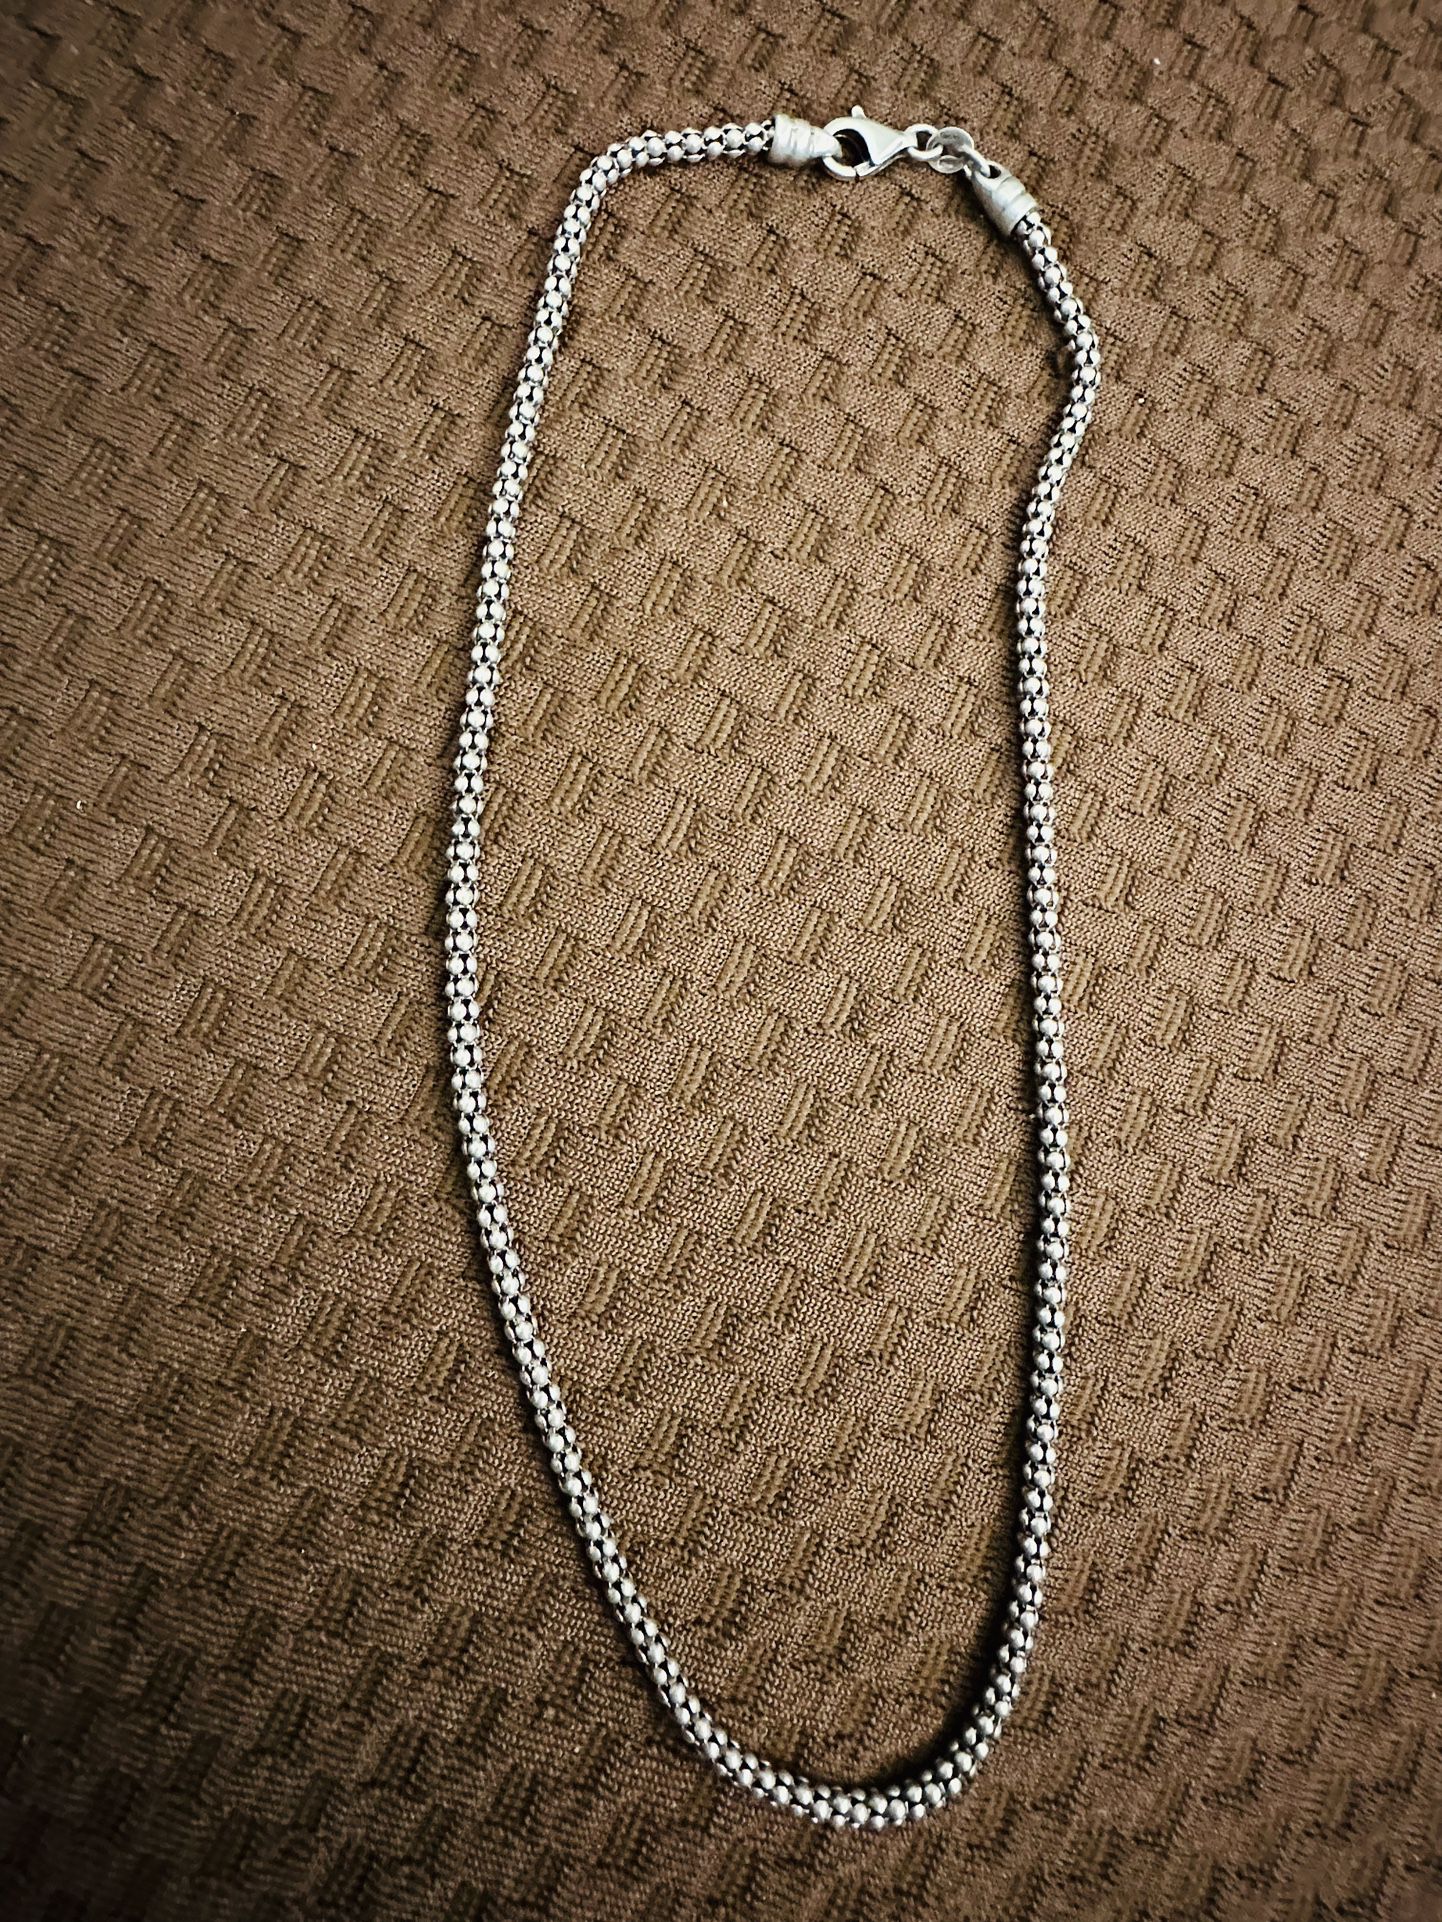 925 SILVER SOLID NECKLACE PERFECT CONDITION BEATIFUL 16 INCH 